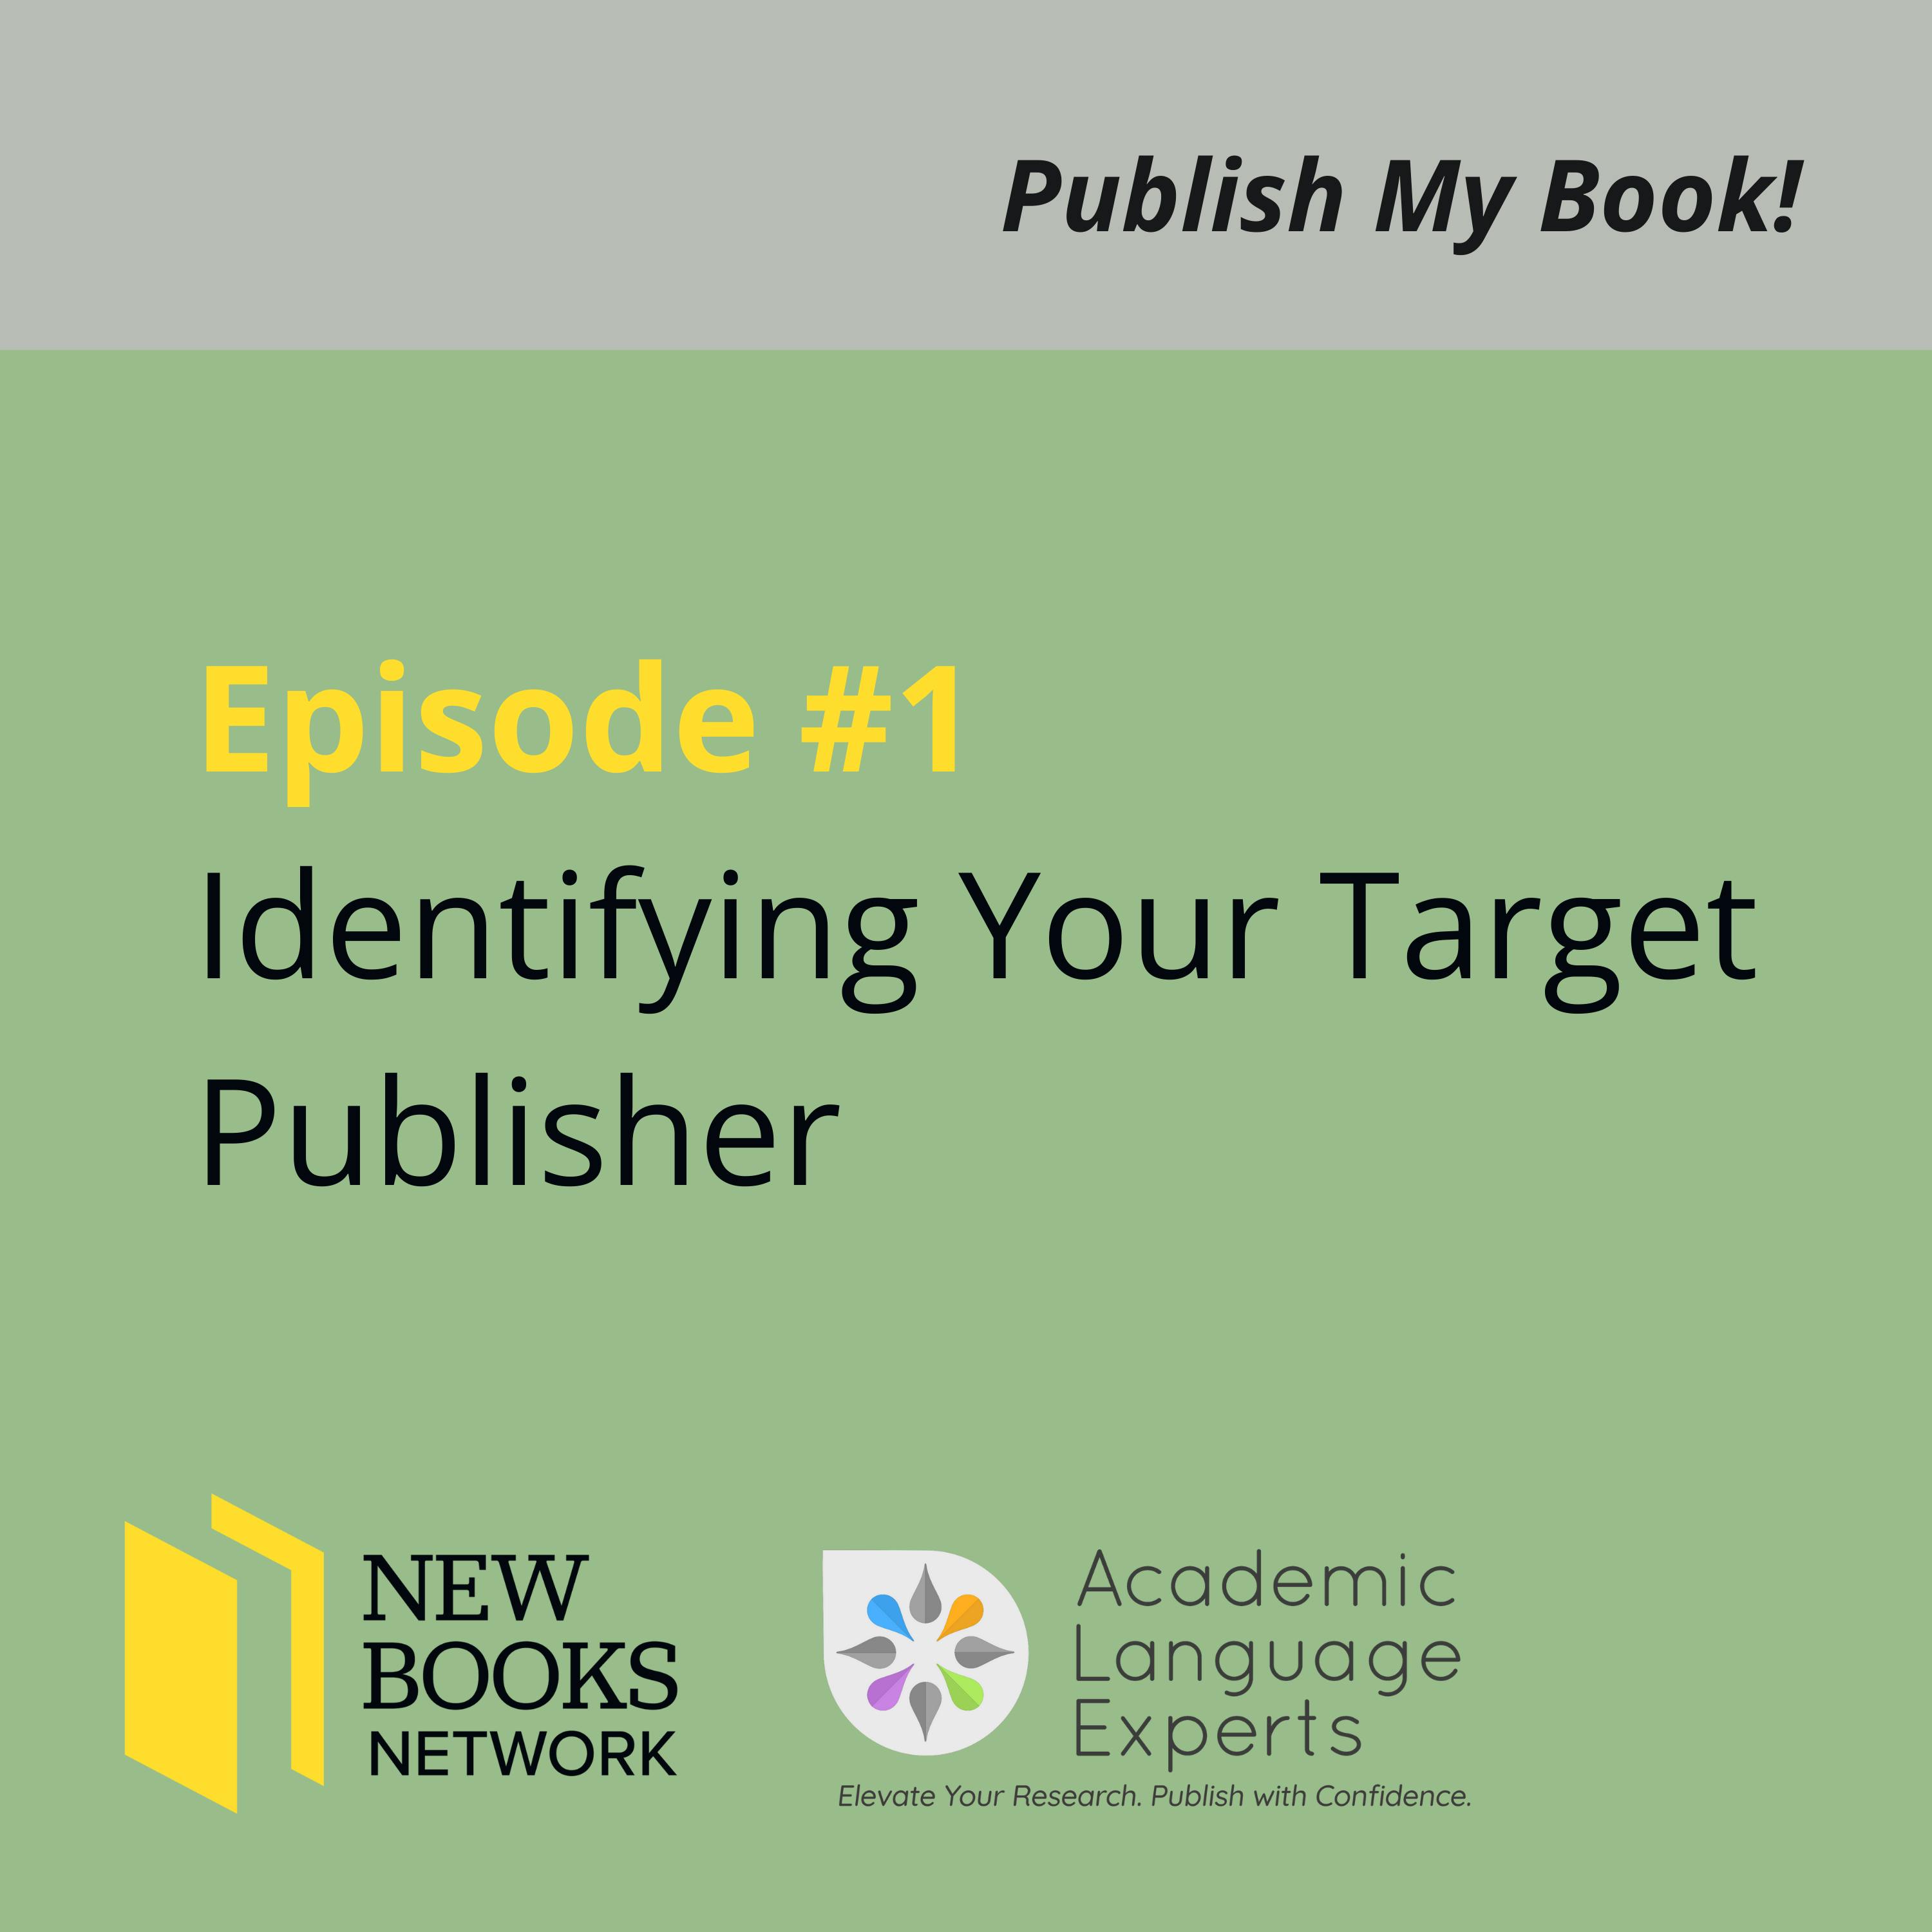 Key Tips to Identifying Your Target Publisher